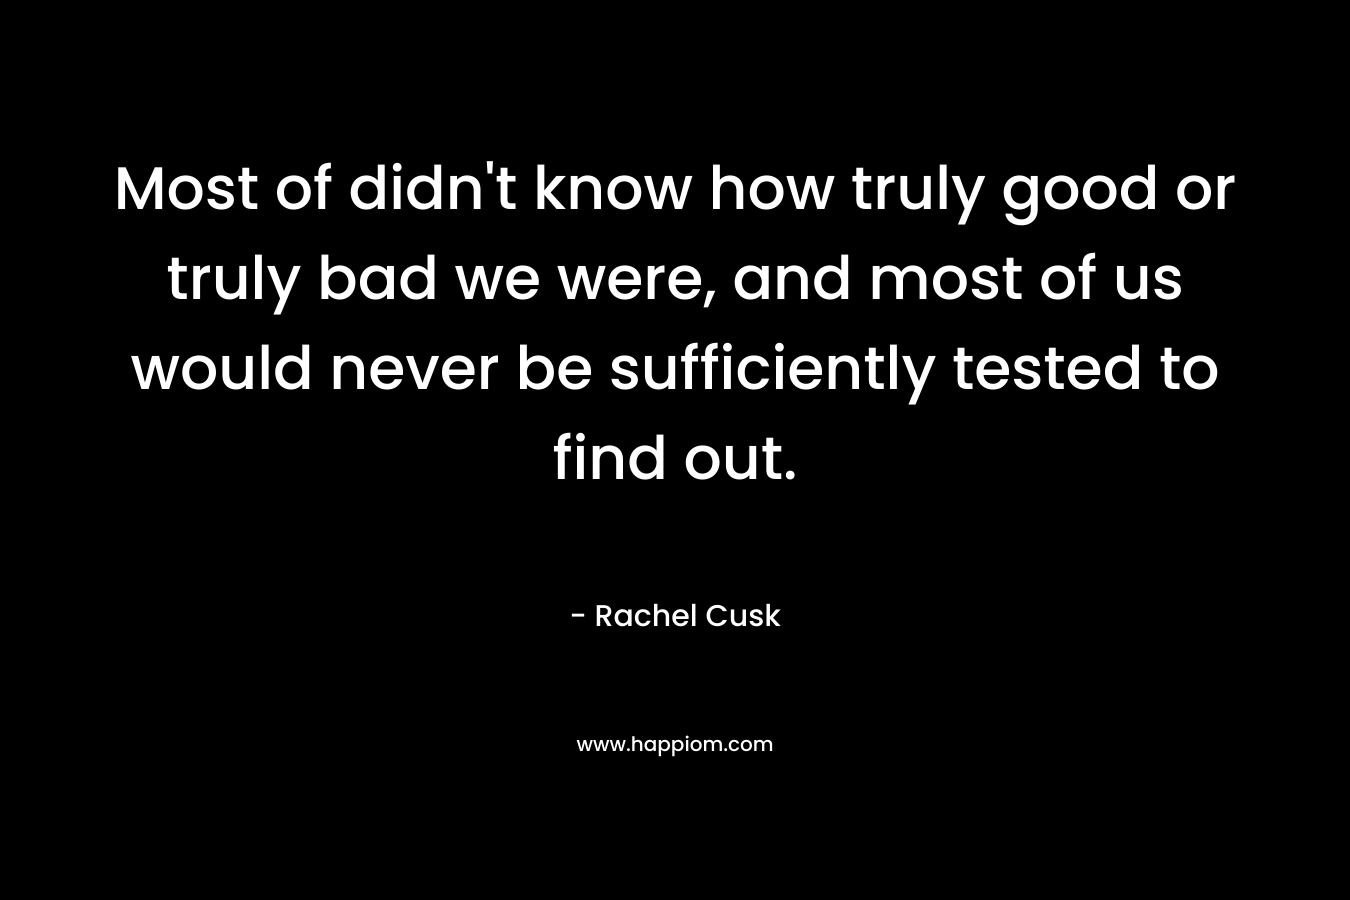 Most of didn’t know how truly good or truly bad we were, and most of us would never be sufficiently tested to find out. – Rachel Cusk